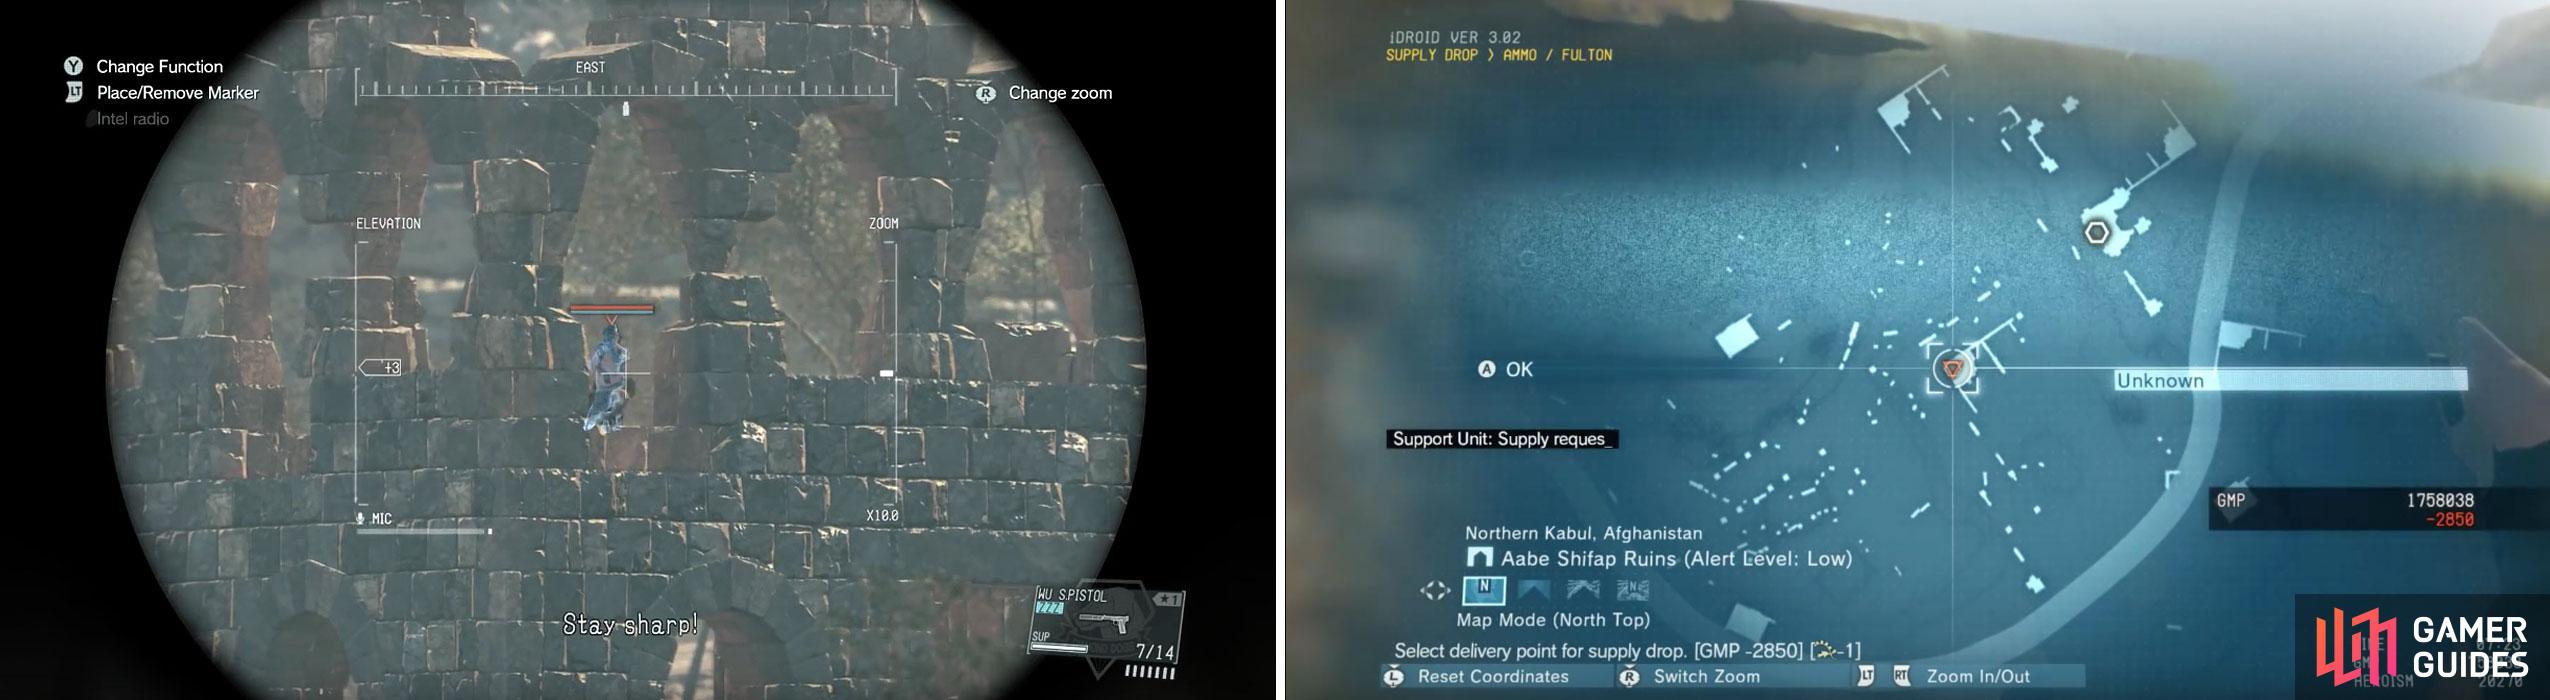 Locate Quiet using your sniper rifle or scope (left). Use the map to request a supply drop at Quiet’s location (right).